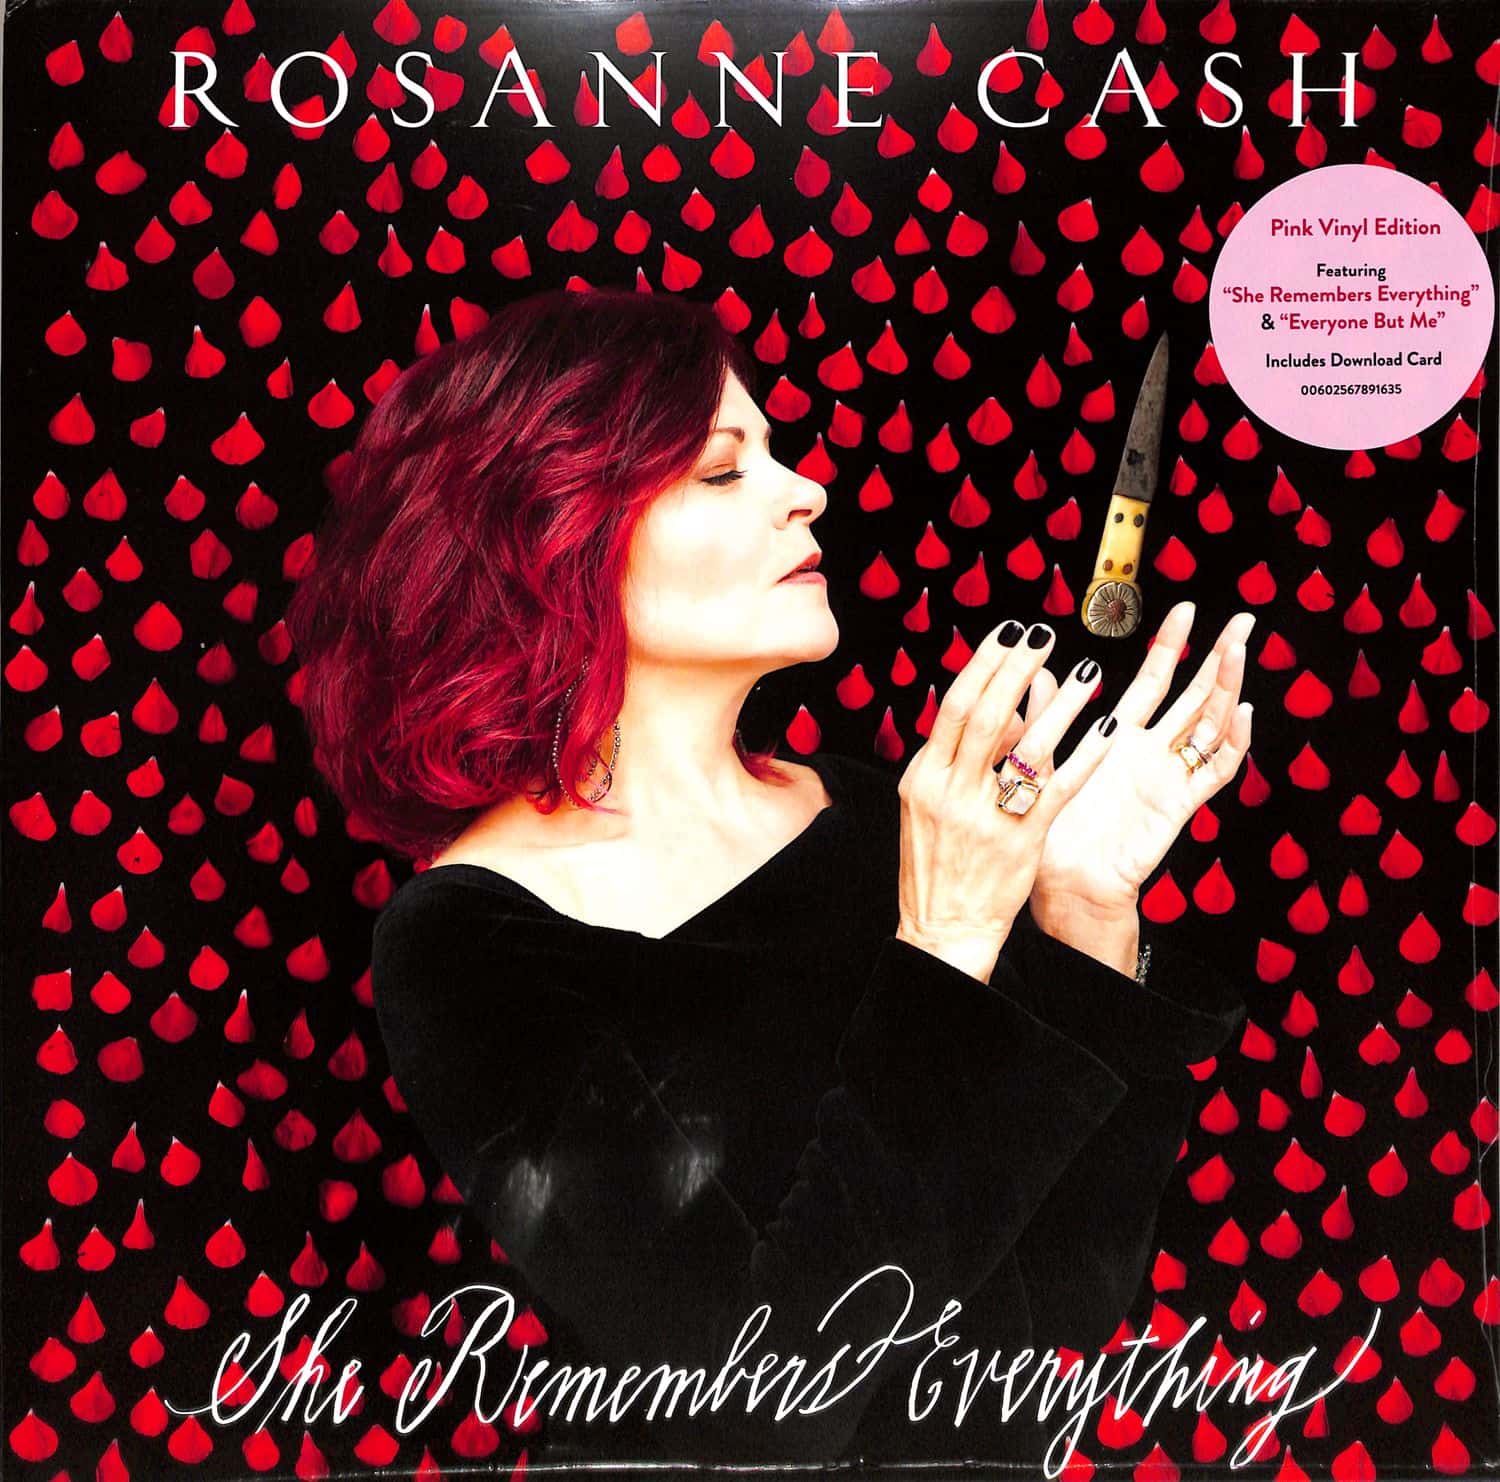 Rosanne Cash - SHE REMEMBERS EVERYTHING 